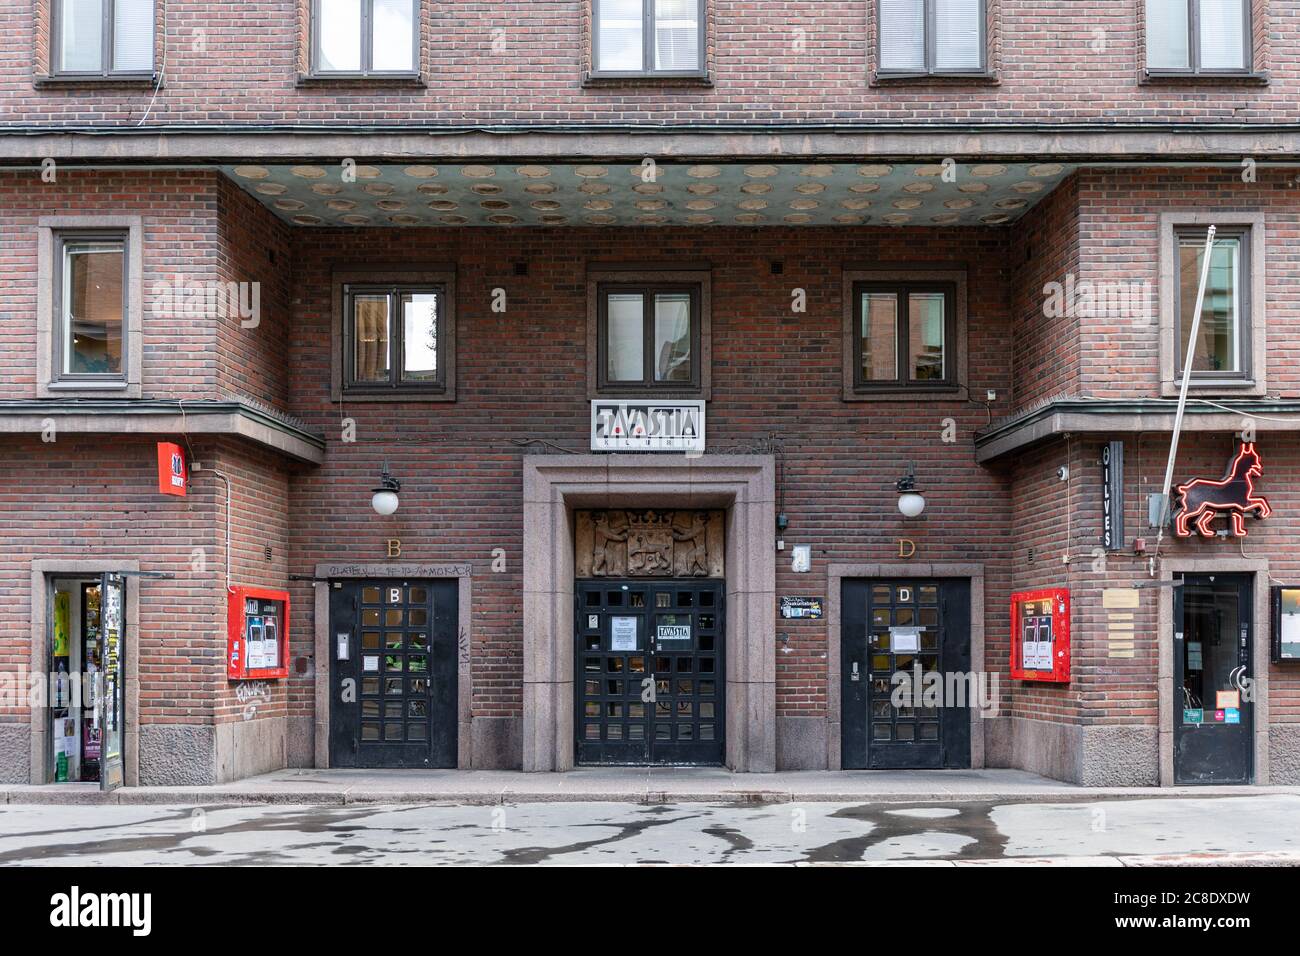 Tavastia Klubi, one of the oldest European rock music clubs that remains in continuous use, in Helsinki, Finland Stock Photo